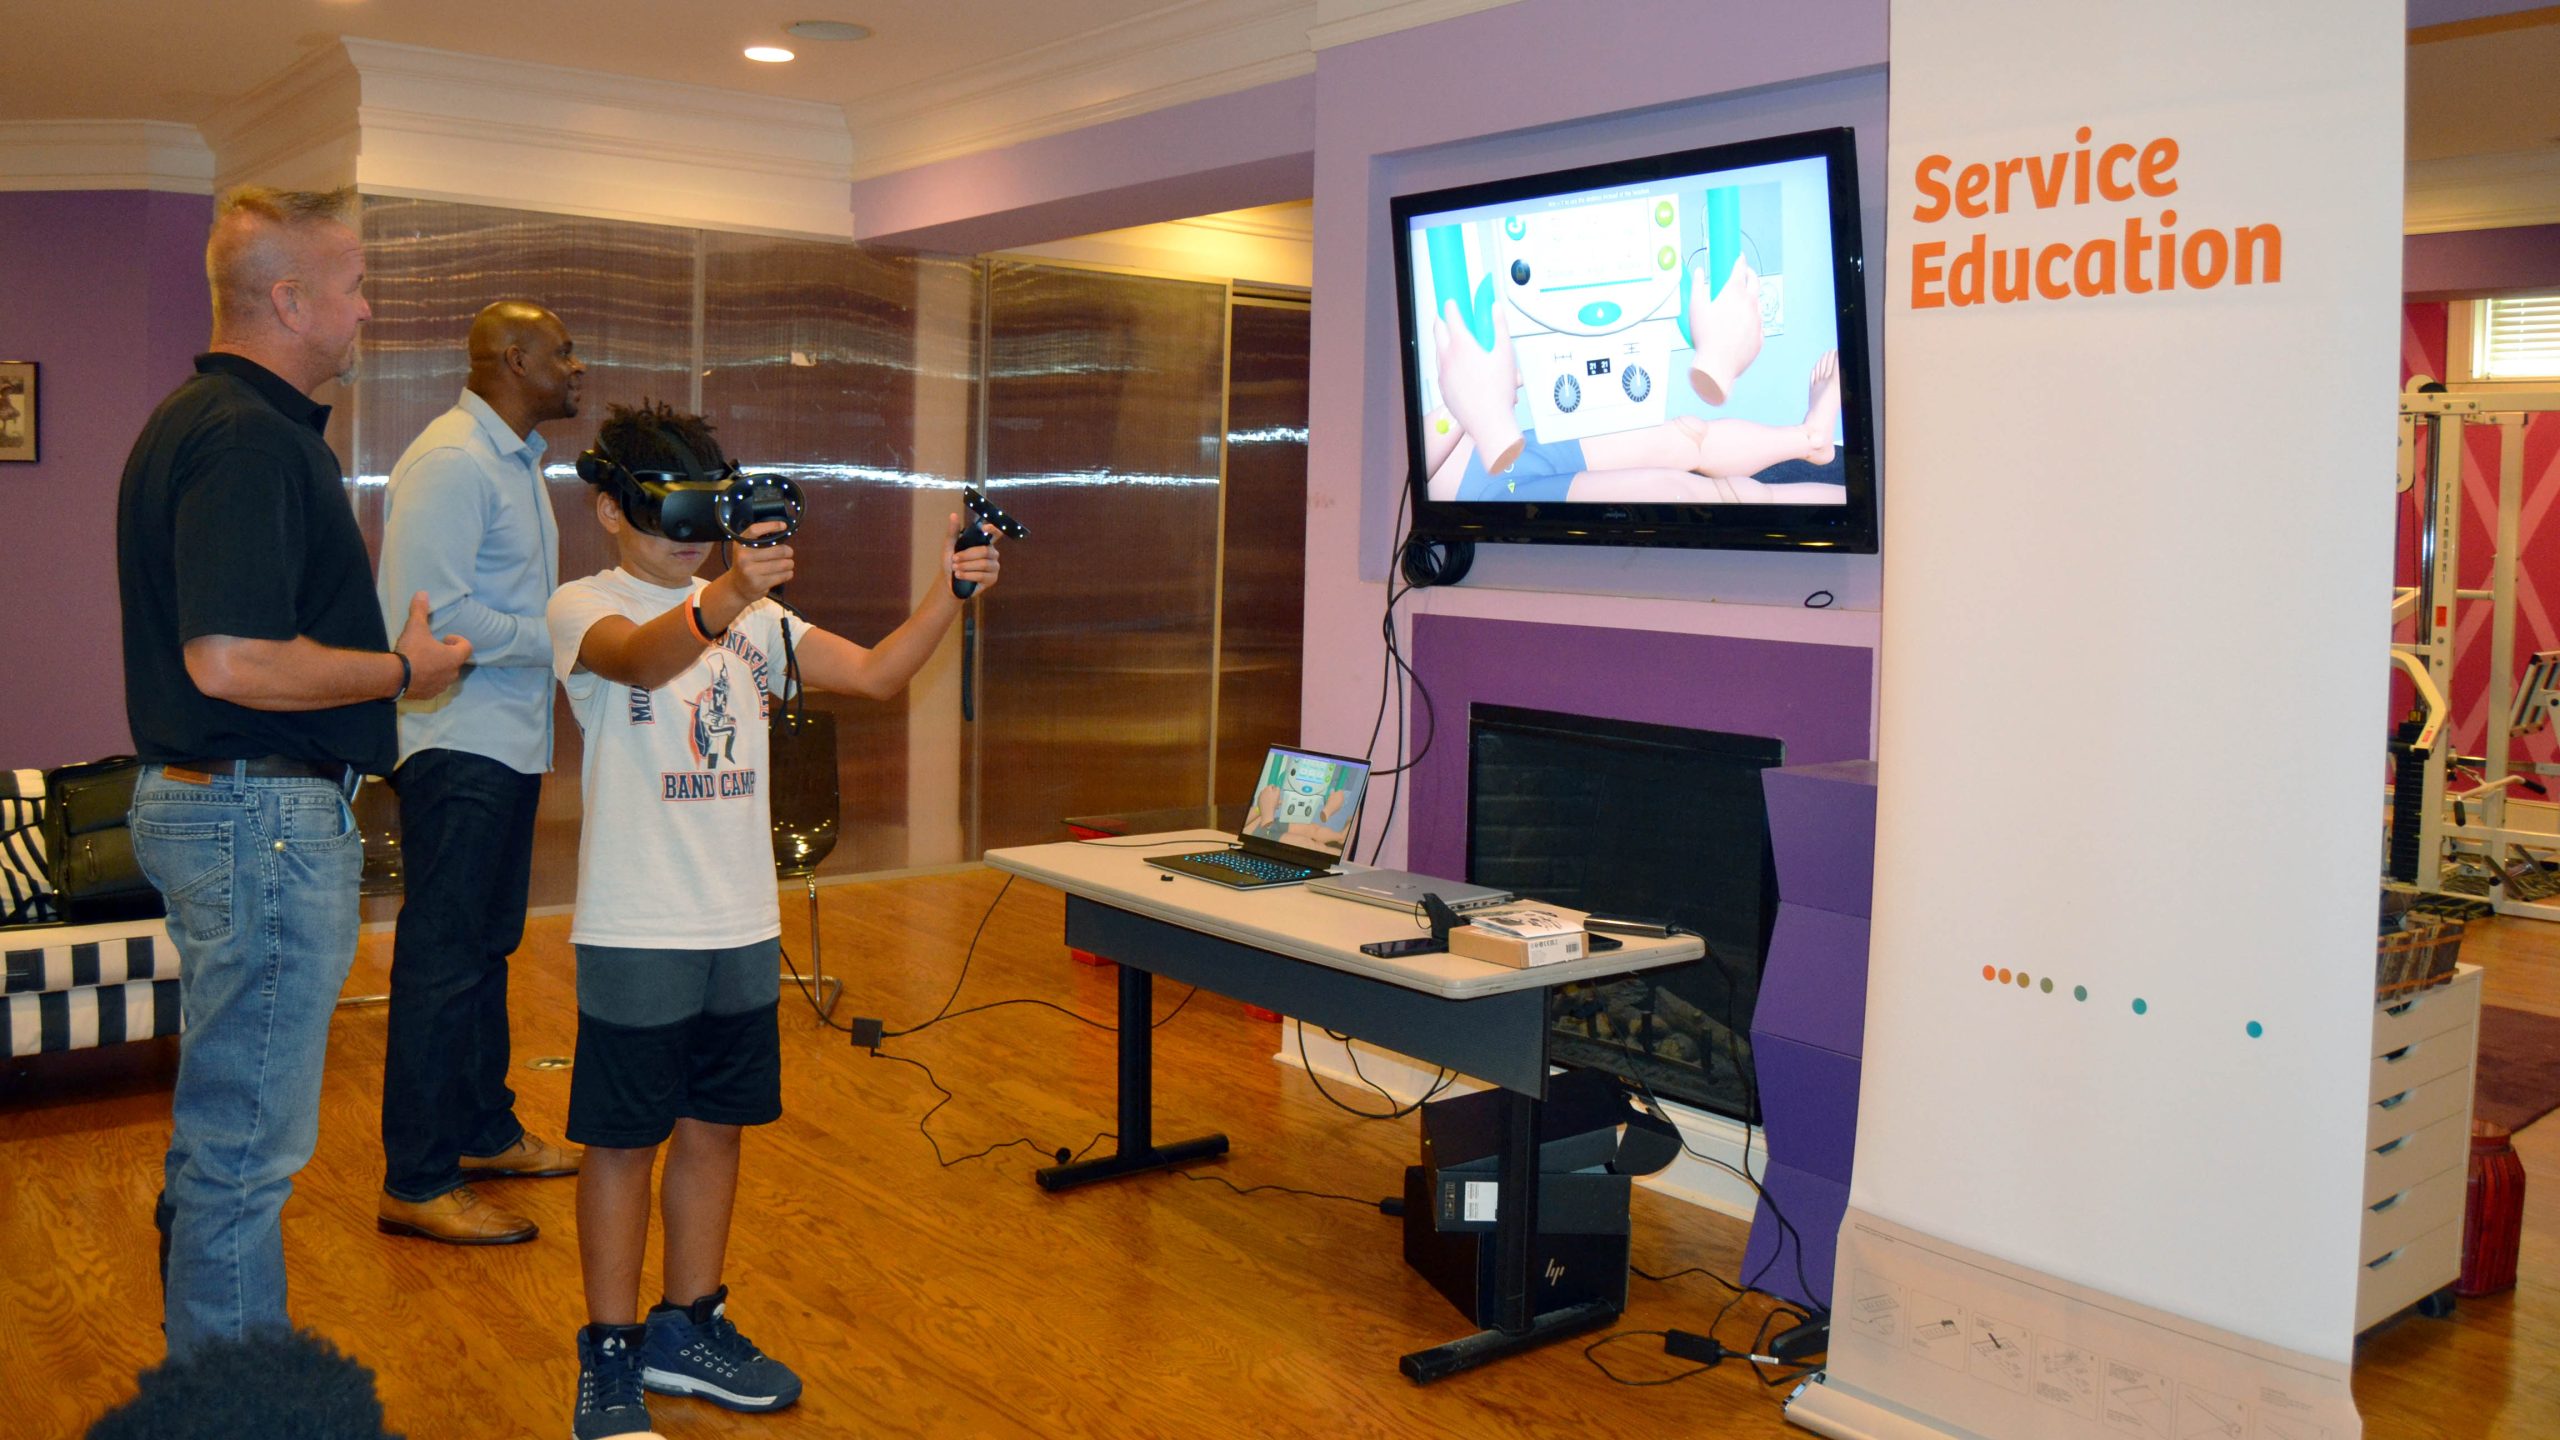 St. louis Scholars learn and explore sciences in Virtual Reality